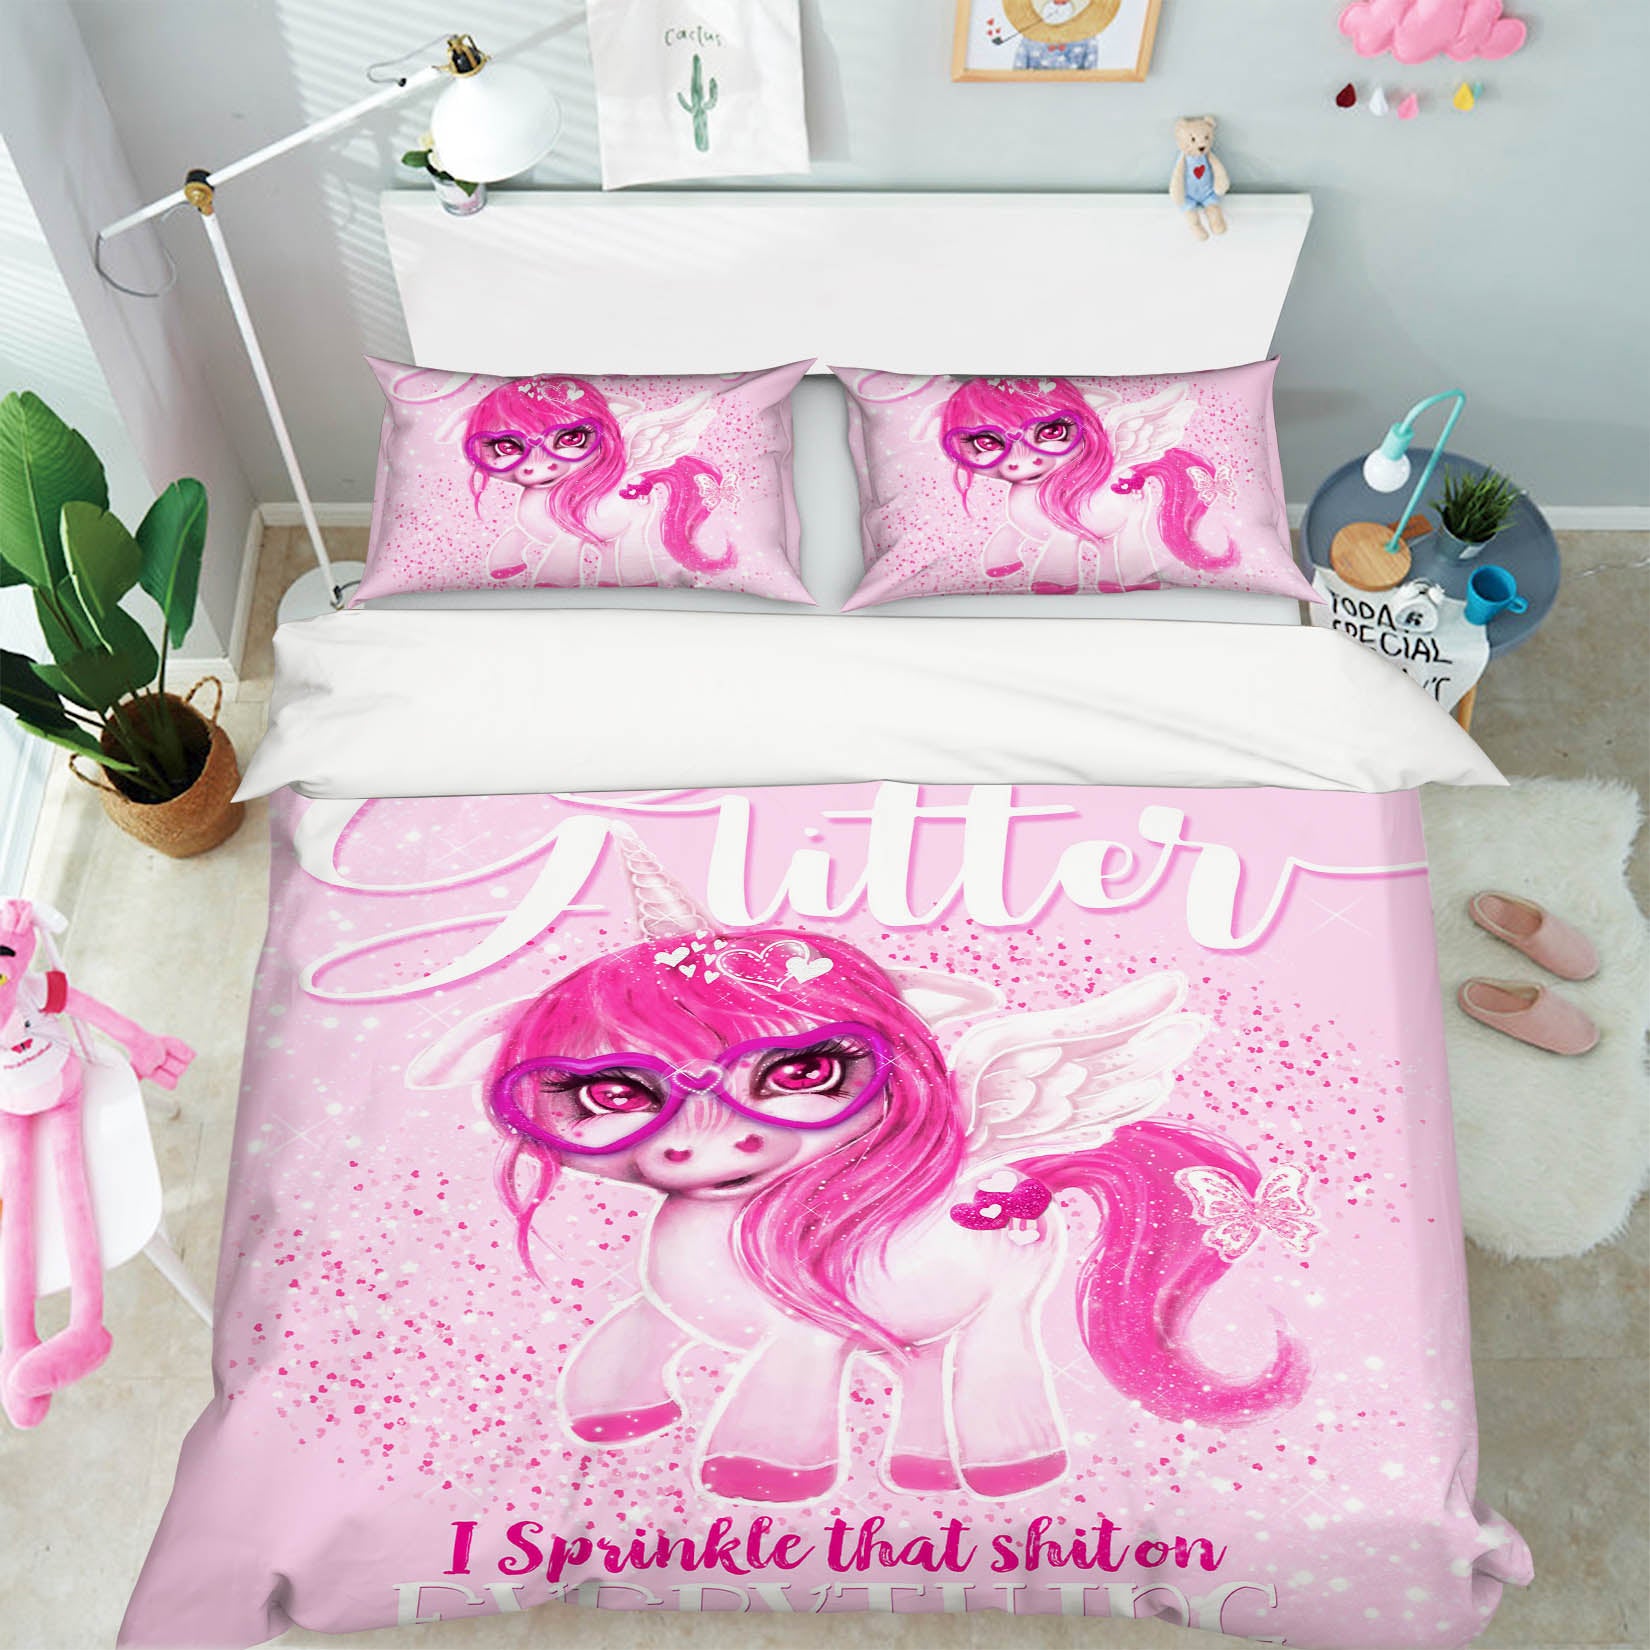 3D Pink Unicorn 8551 Sheena Pike Bedding Bed Pillowcases Quilt Cover Duvet Cover